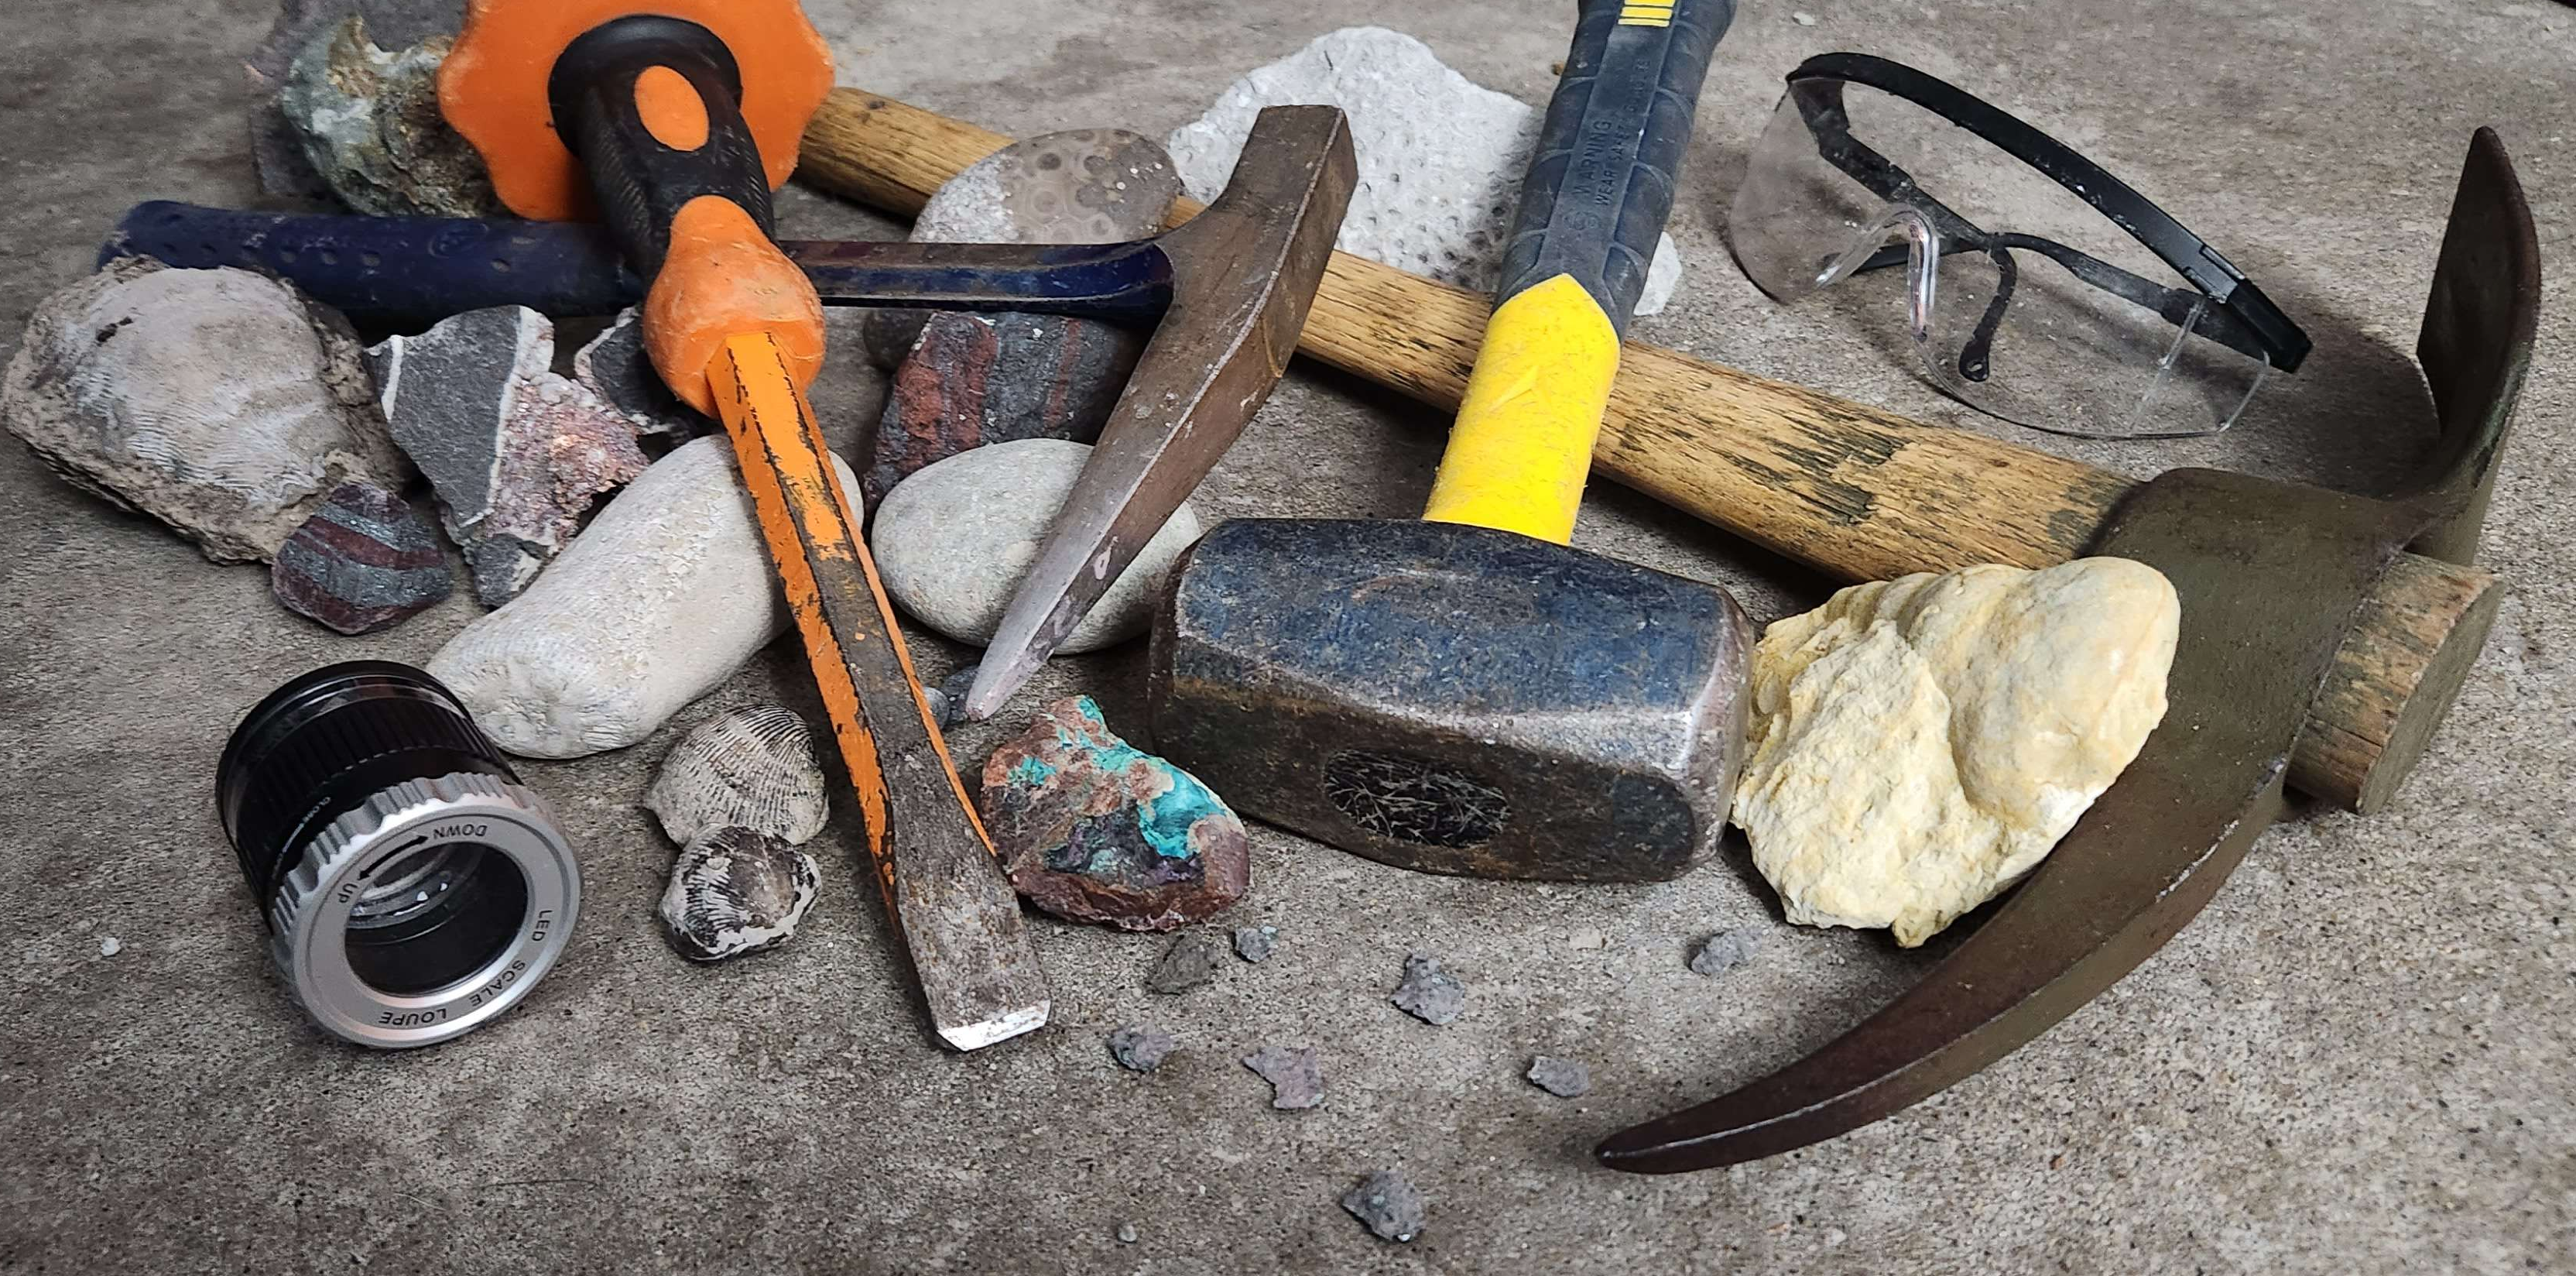 Image of rocks and tools